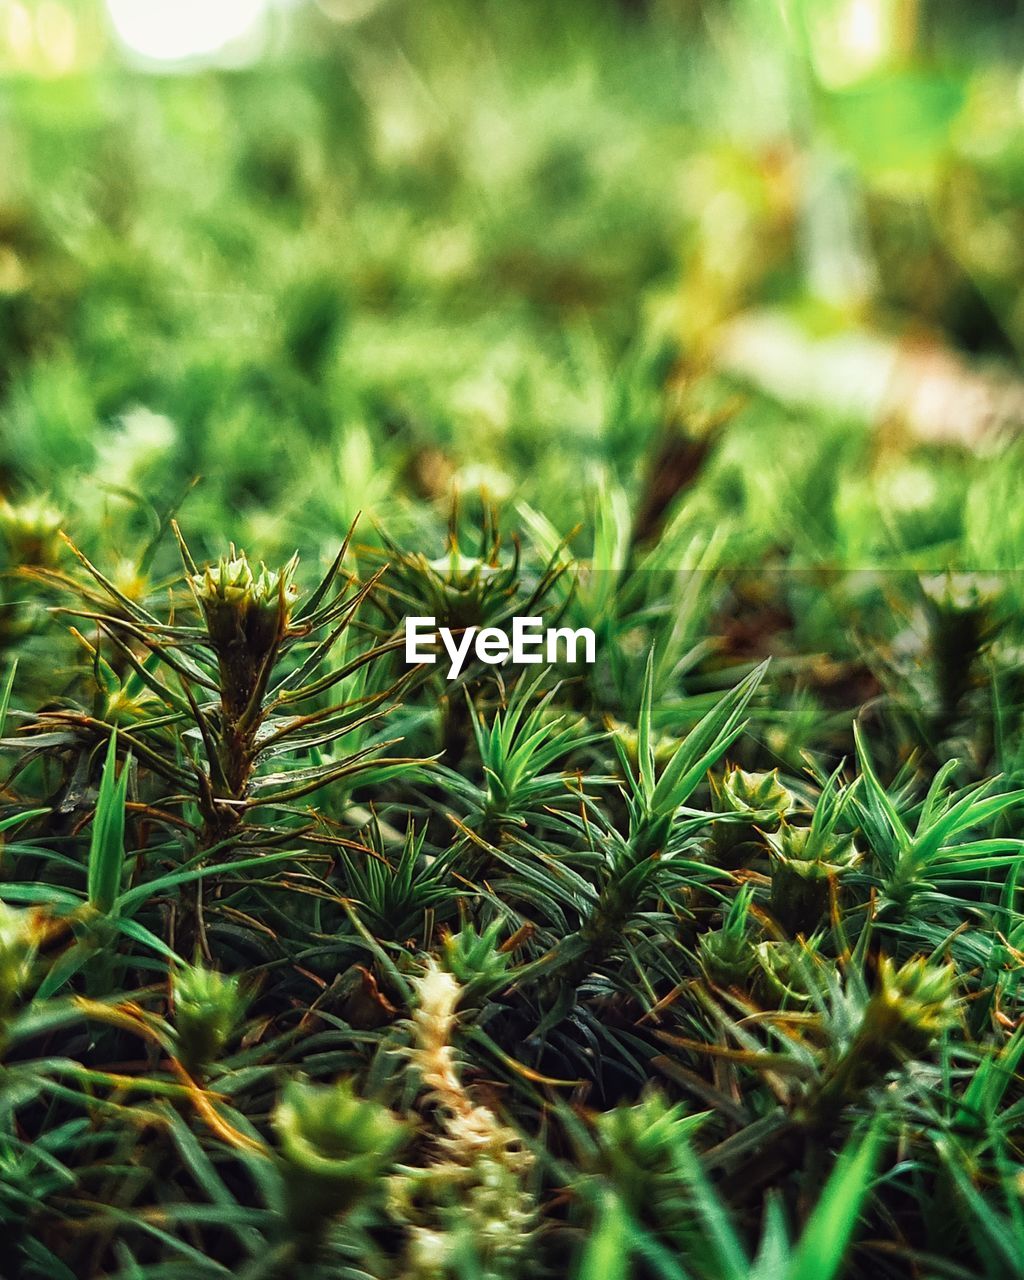 plant, green, tree, growth, nature, leaf, grass, beauty in nature, coniferous tree, pinaceae, no people, pine tree, branch, close-up, land, moss, day, lawn, flower, selective focus, outdoors, plant part, environment, fir, focus on foreground, spruce, field, macro photography, tranquility, needle - plant part